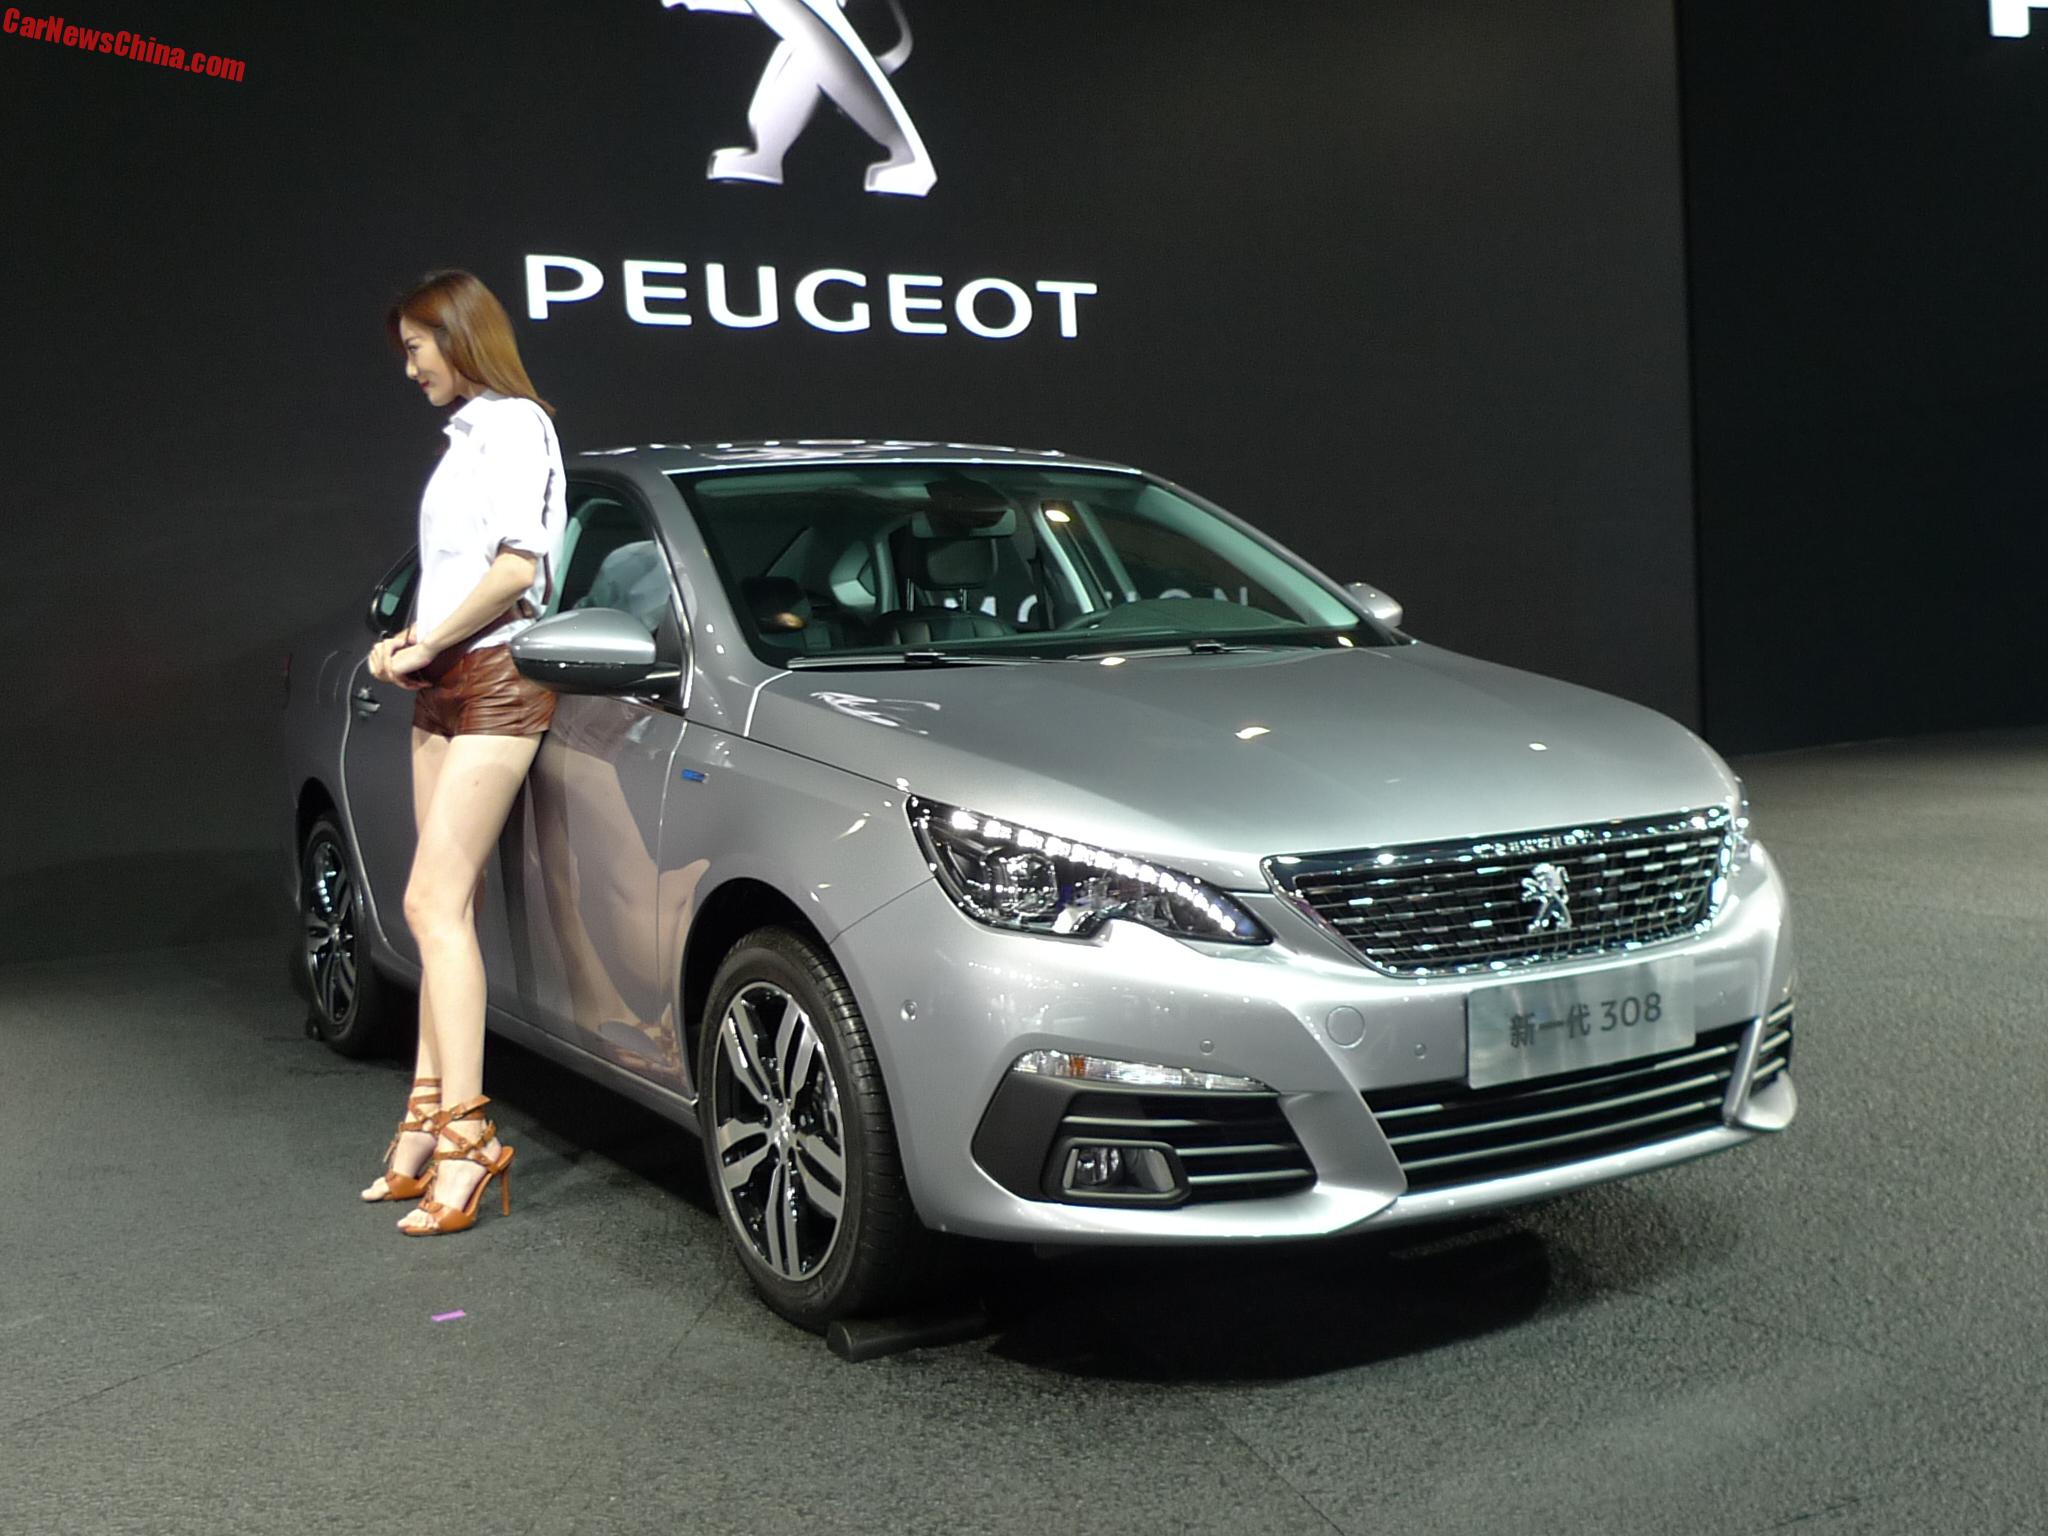 New Peugeot 308 Sedan Launched On The Chengdu Auto Show